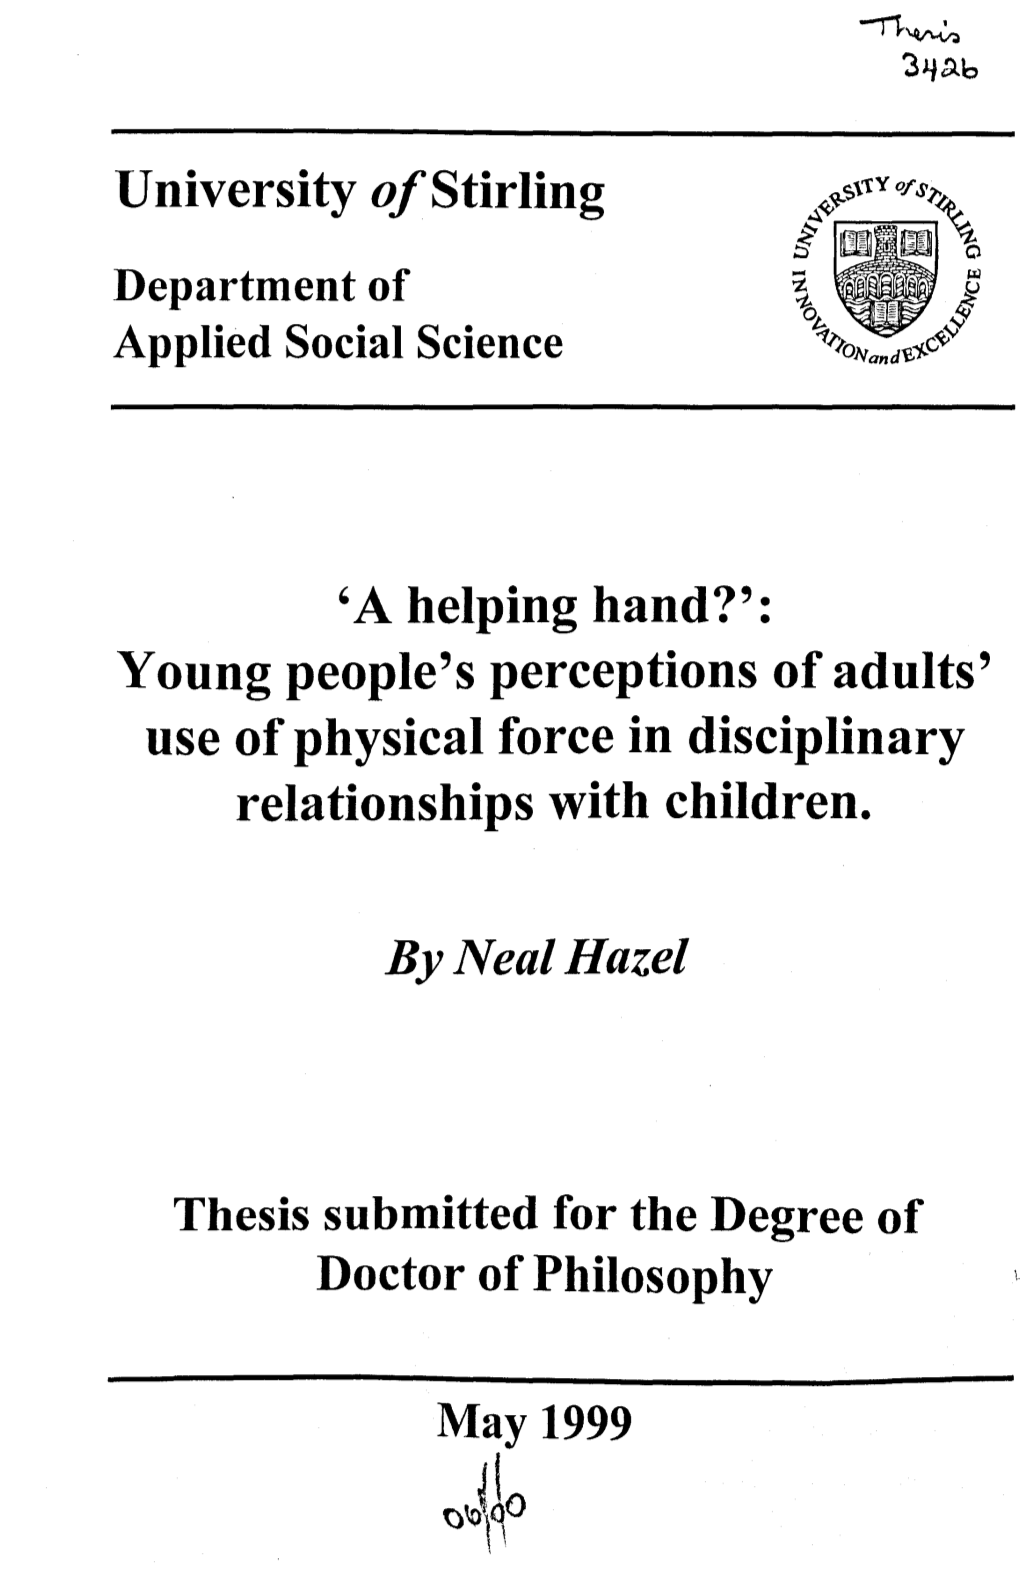 Young People's Perceptions of Adults' Use of Physical Force in Disciplinary Relationships with Children